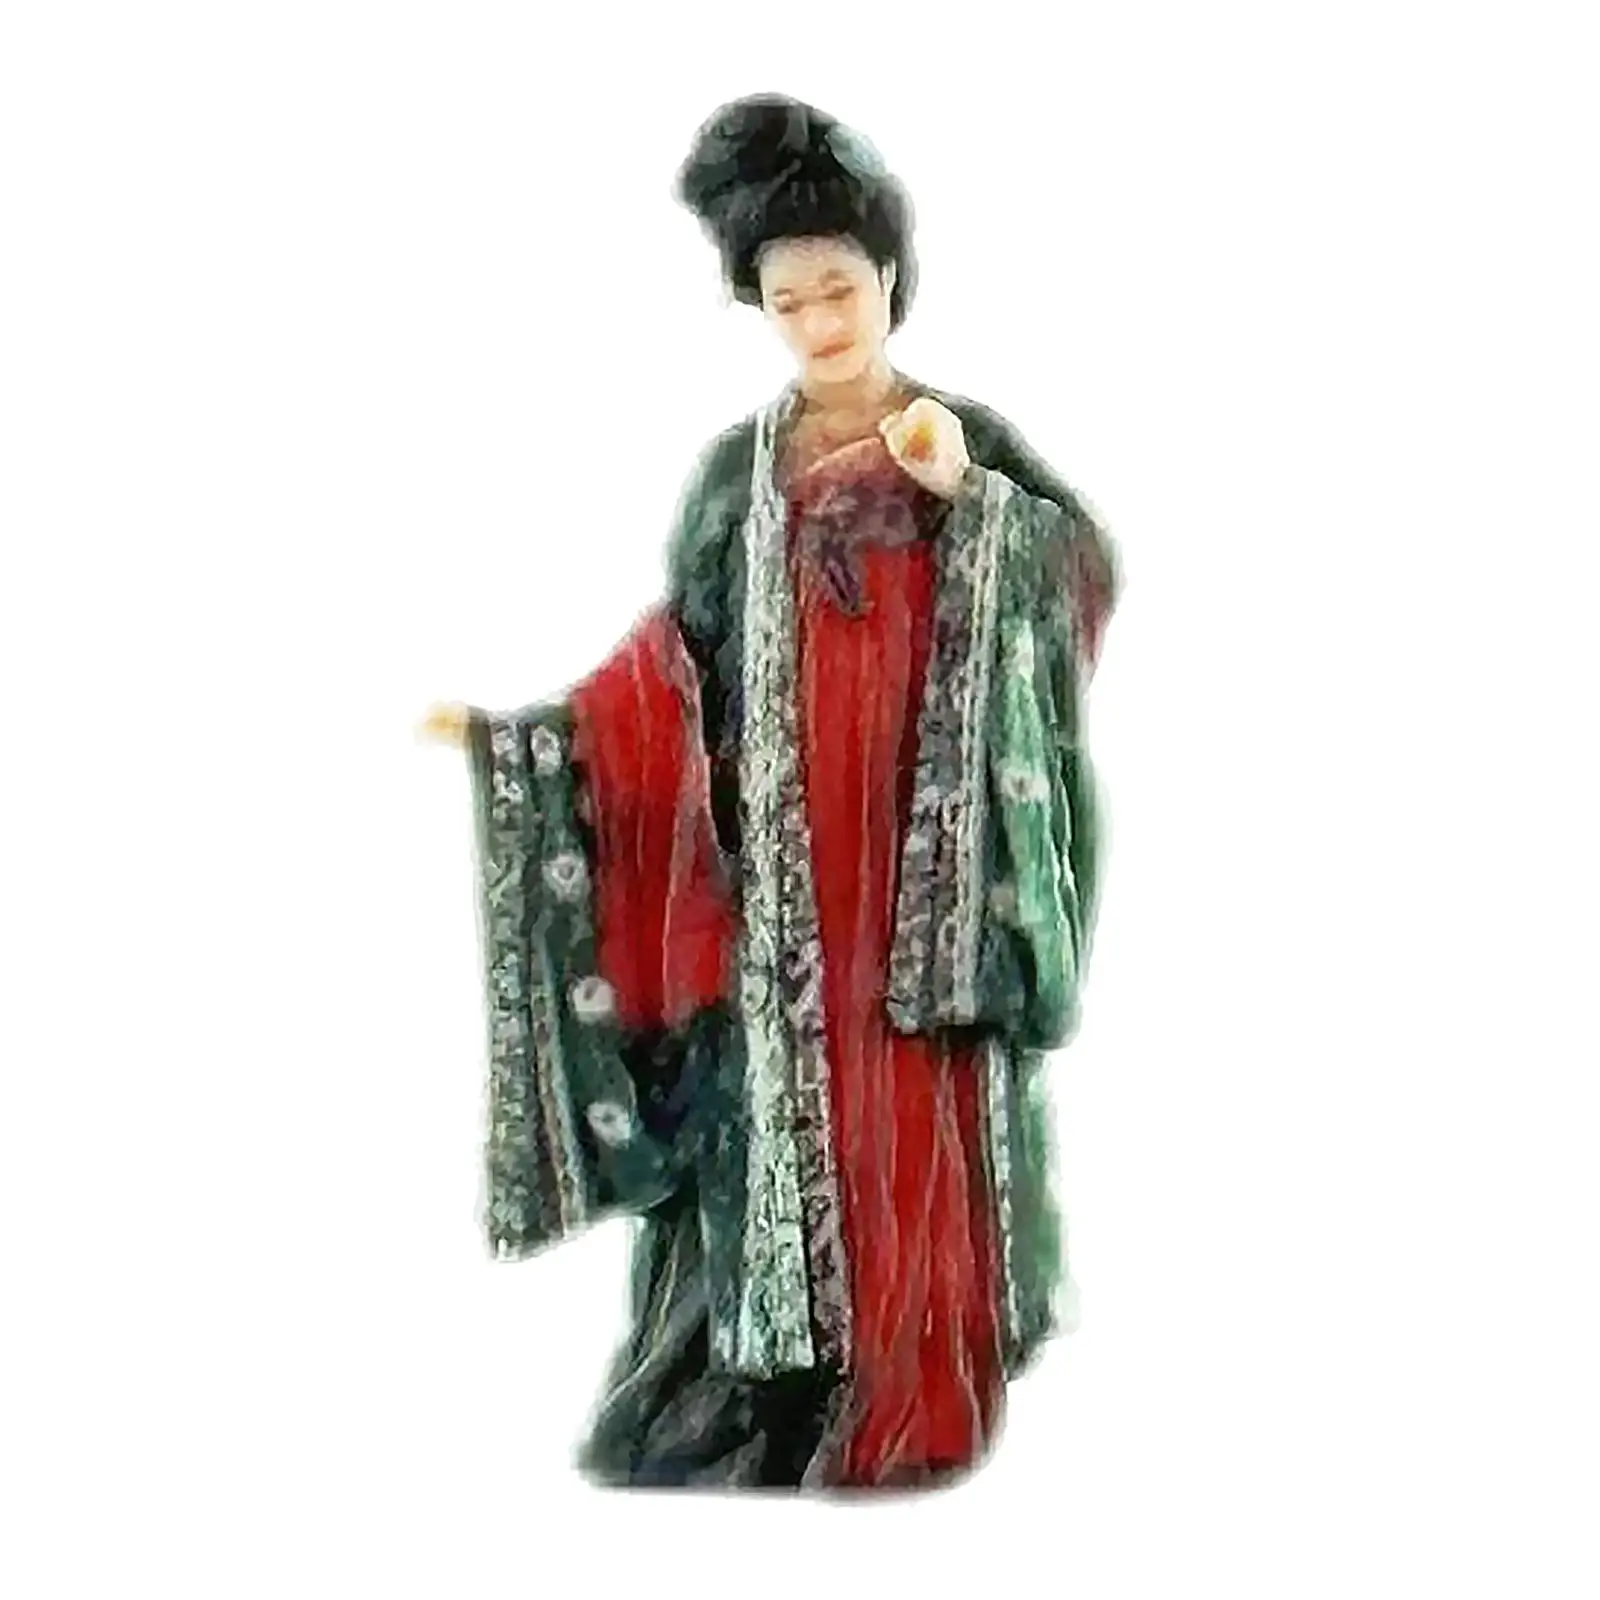 1/87 Realistic Character Figure Handmade Collectibles Ancient Beautiful Women Statue for Scenery Landscape Dollhouse Decor